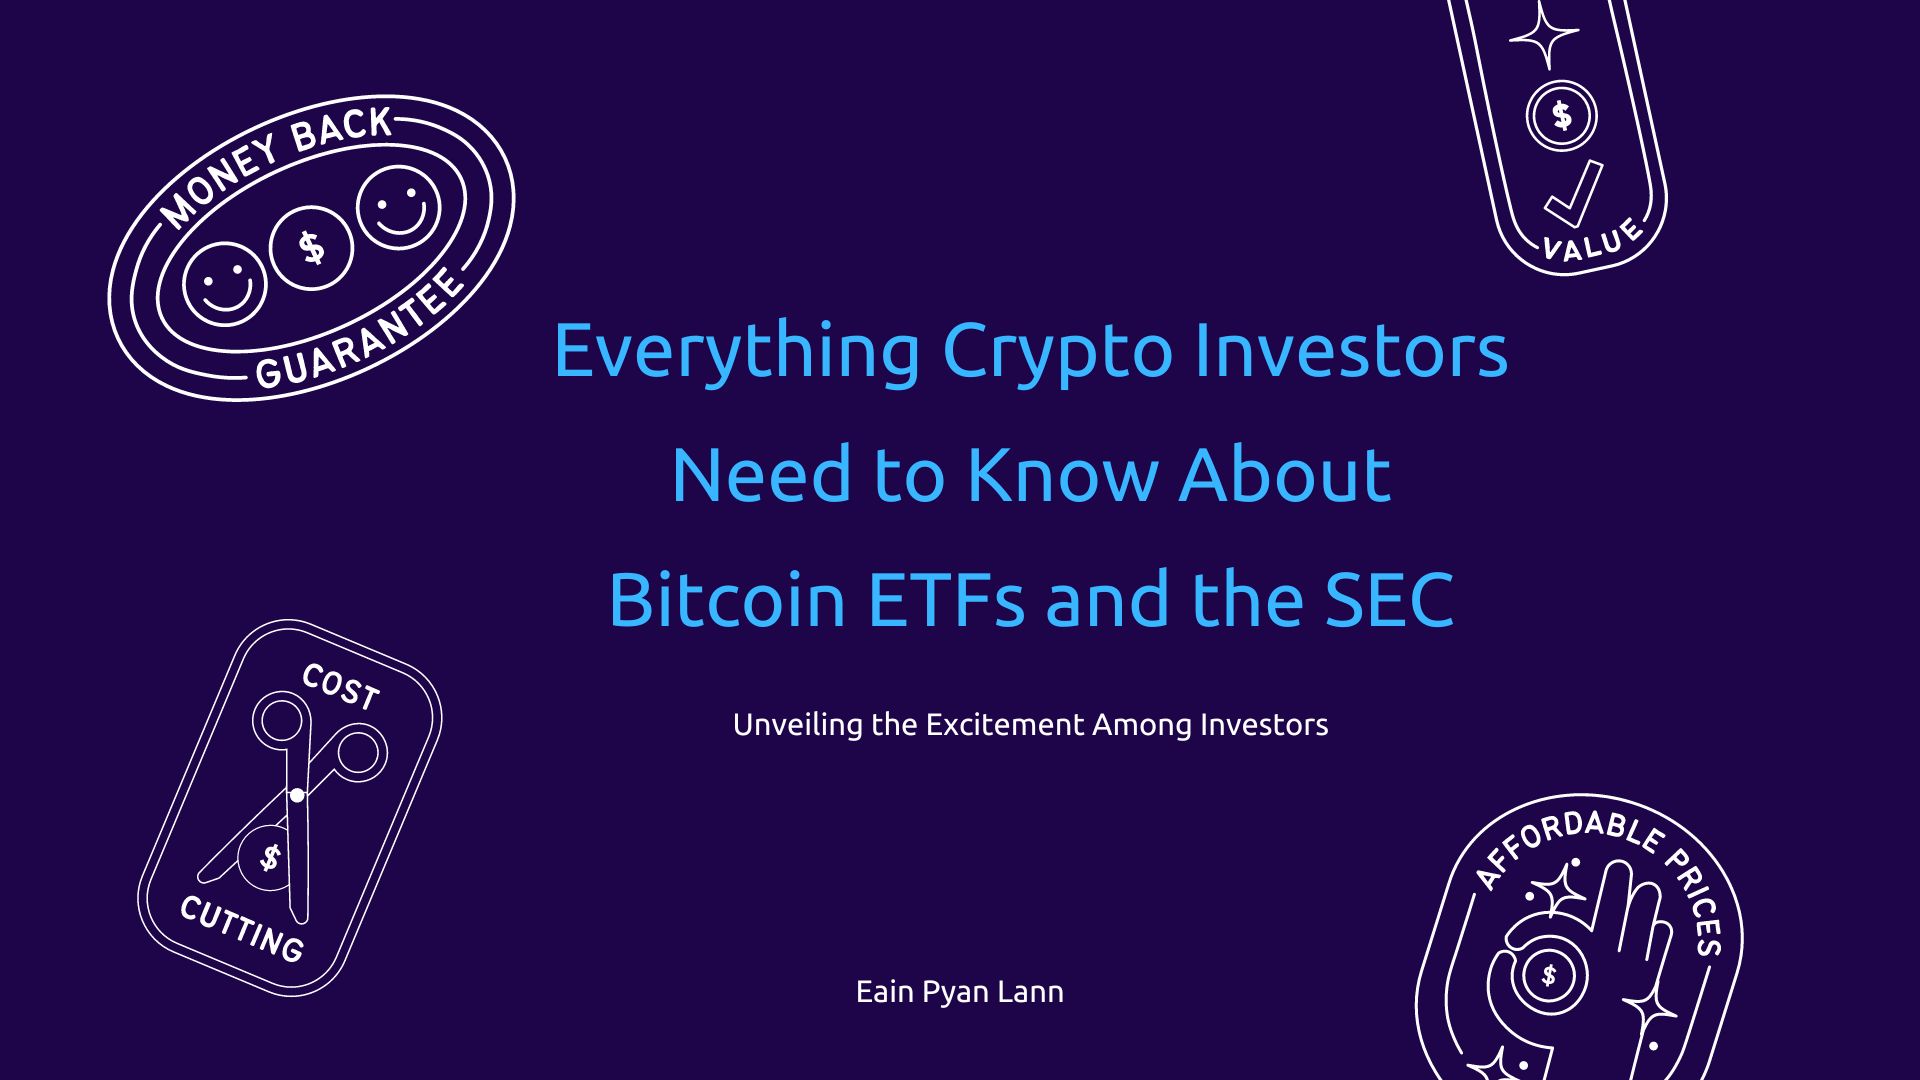 Everything Crypto Investors Need to Know About Bitcoin ETFs and the SEC